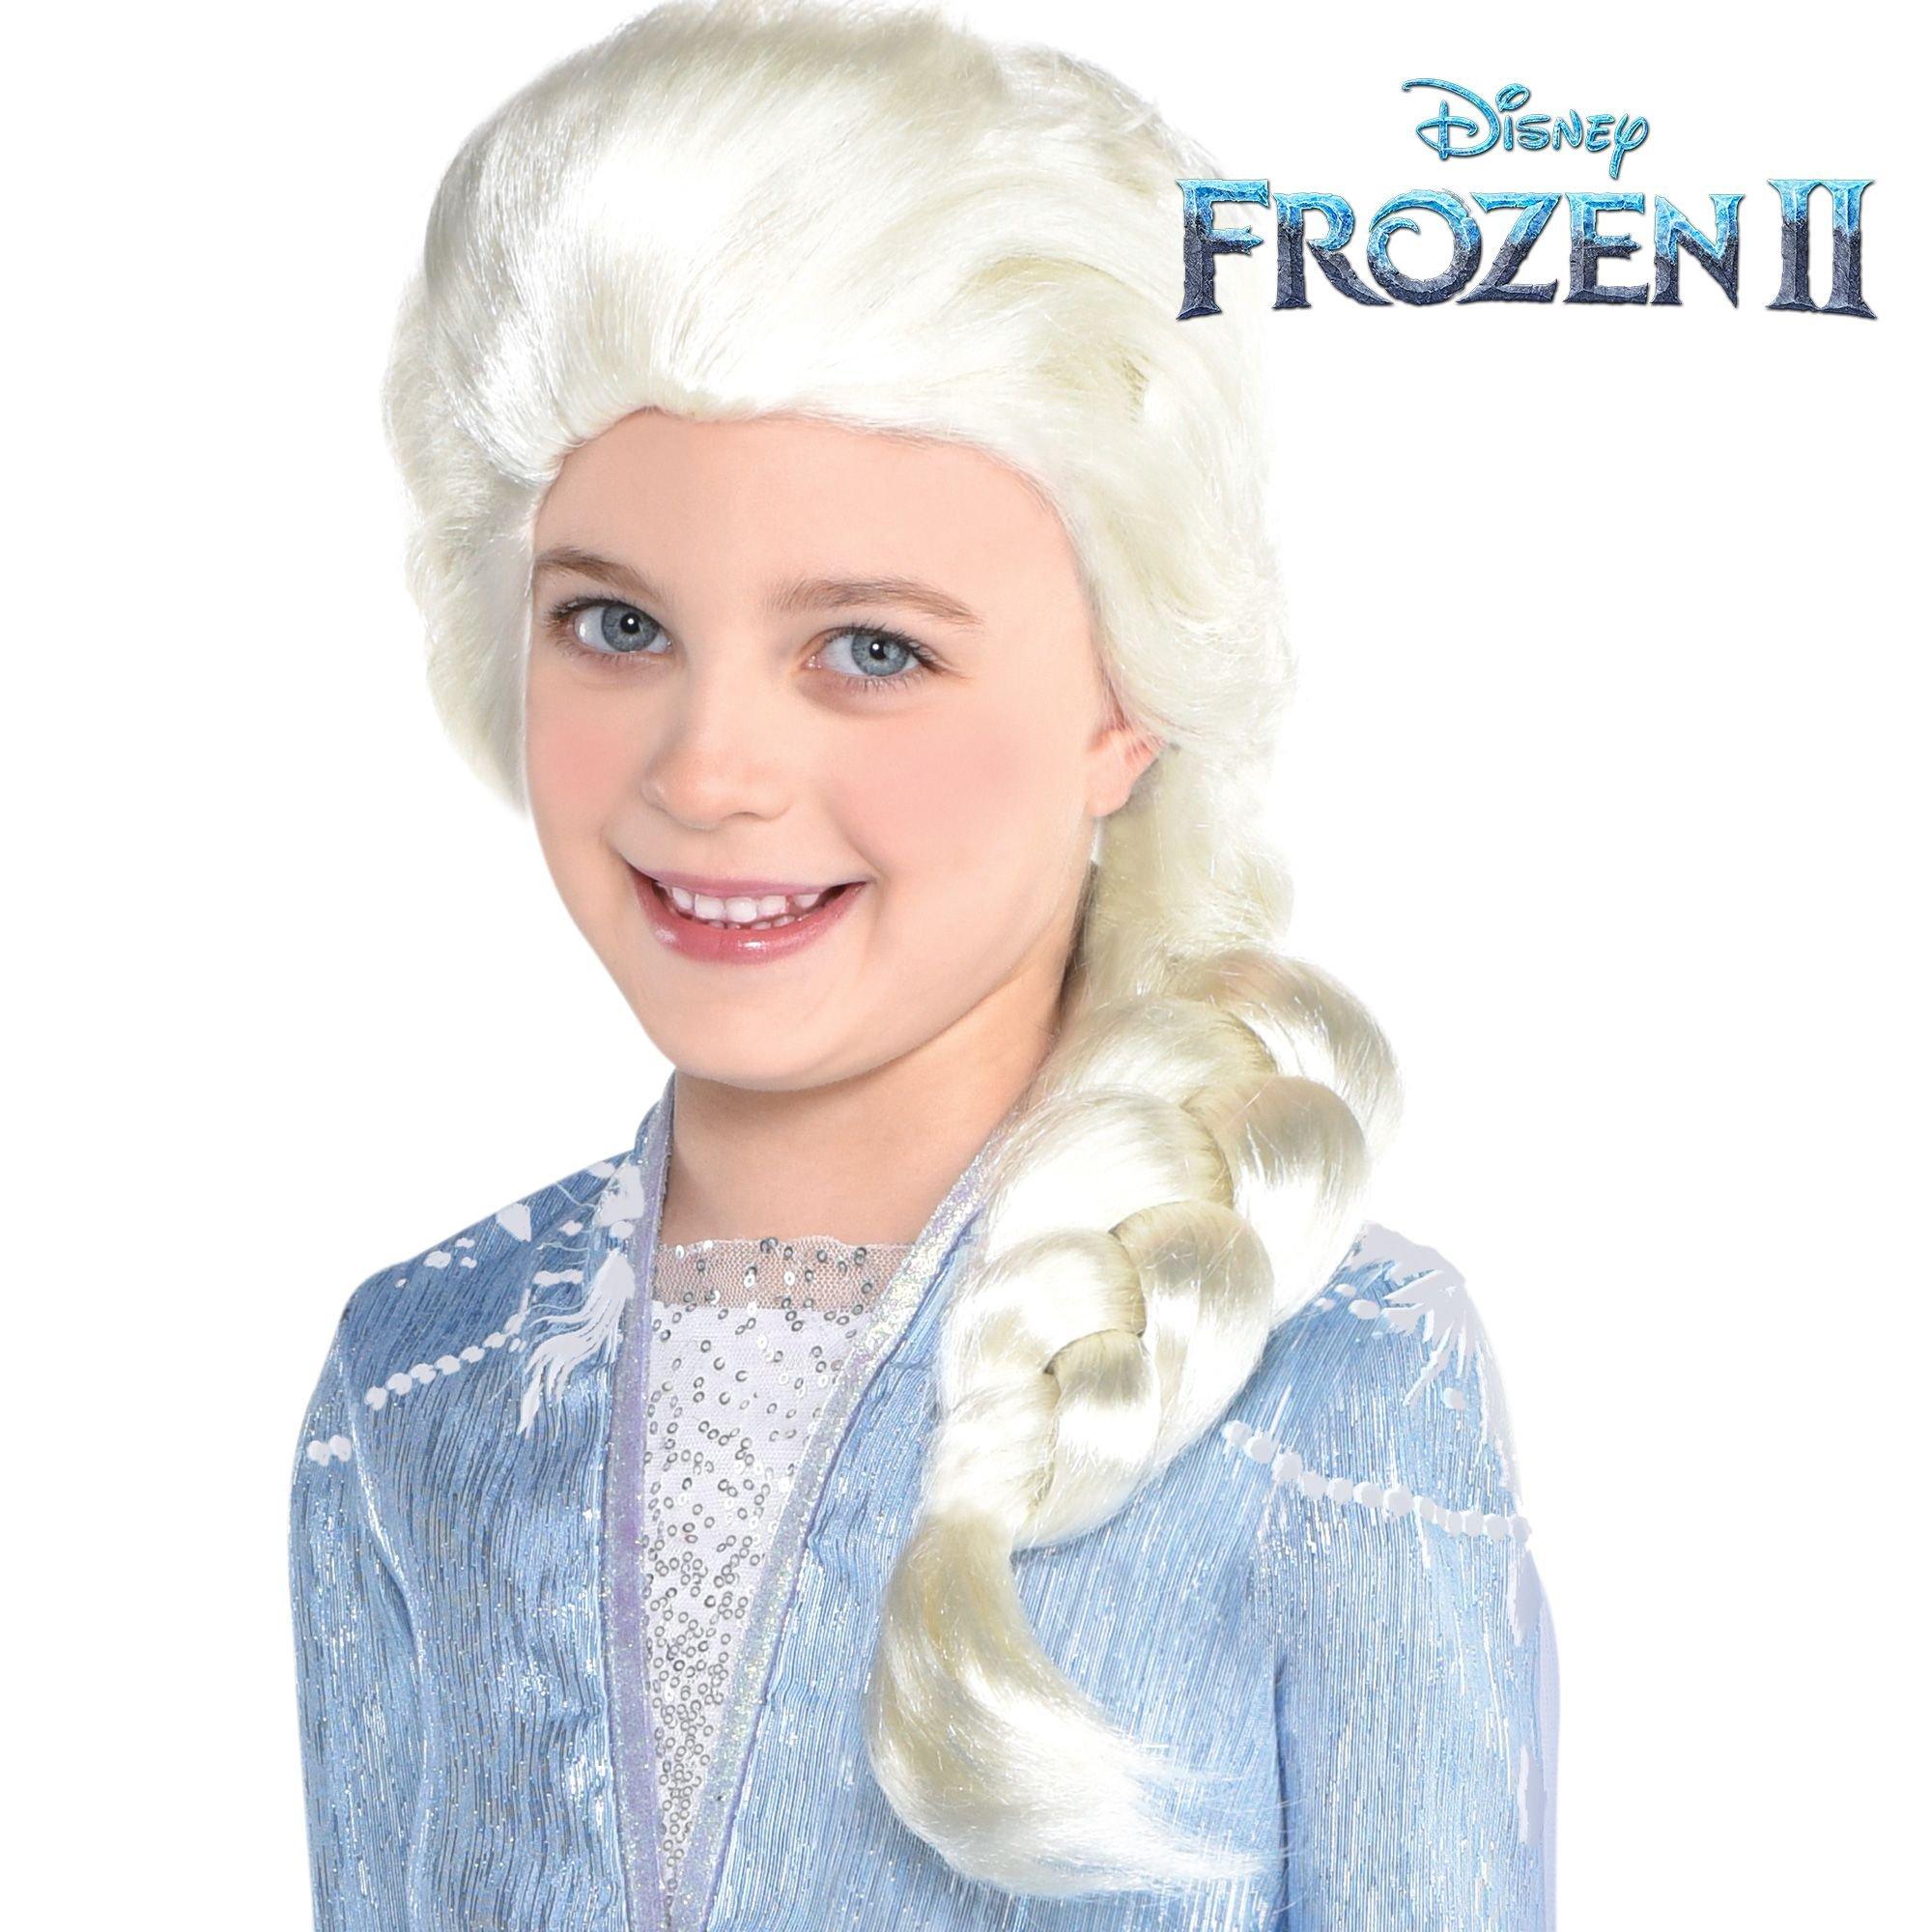 Disney Frozen 2 Costumes for Kids & Adults